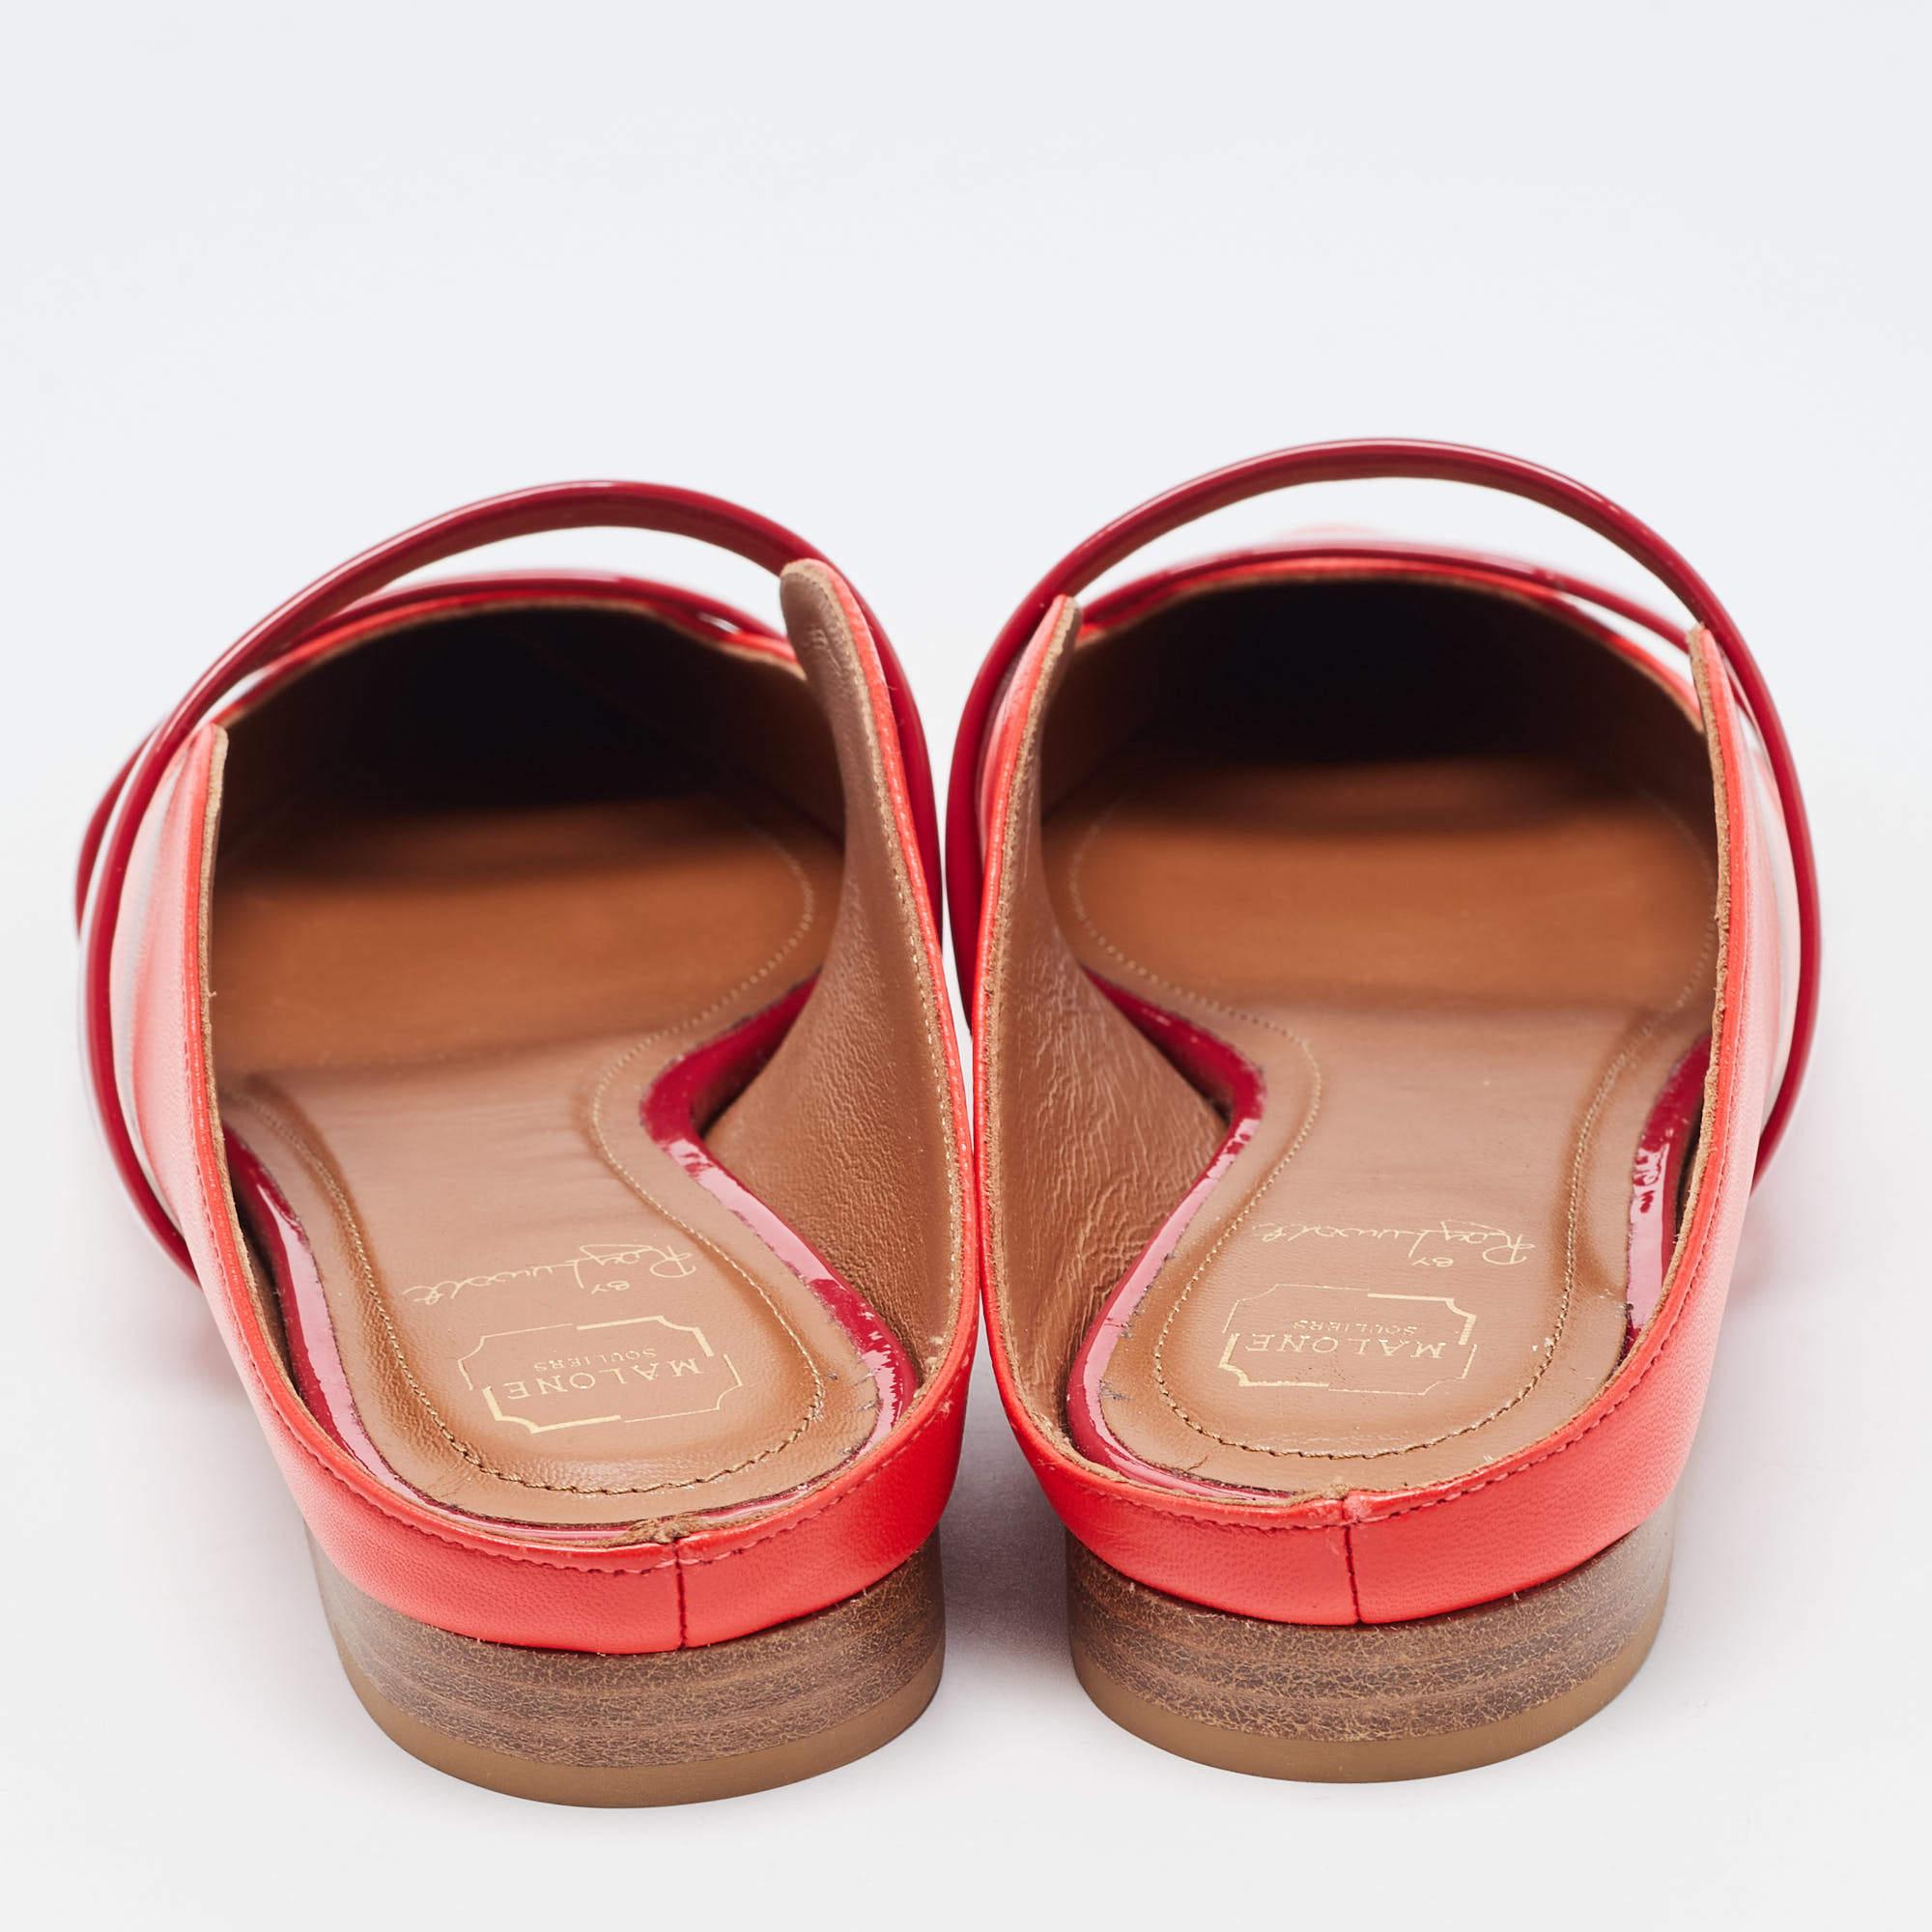 Malone Souliers Red Leather Maureen Flat Mules Size 36 In Excellent Condition For Sale In Dubai, Al Qouz 2